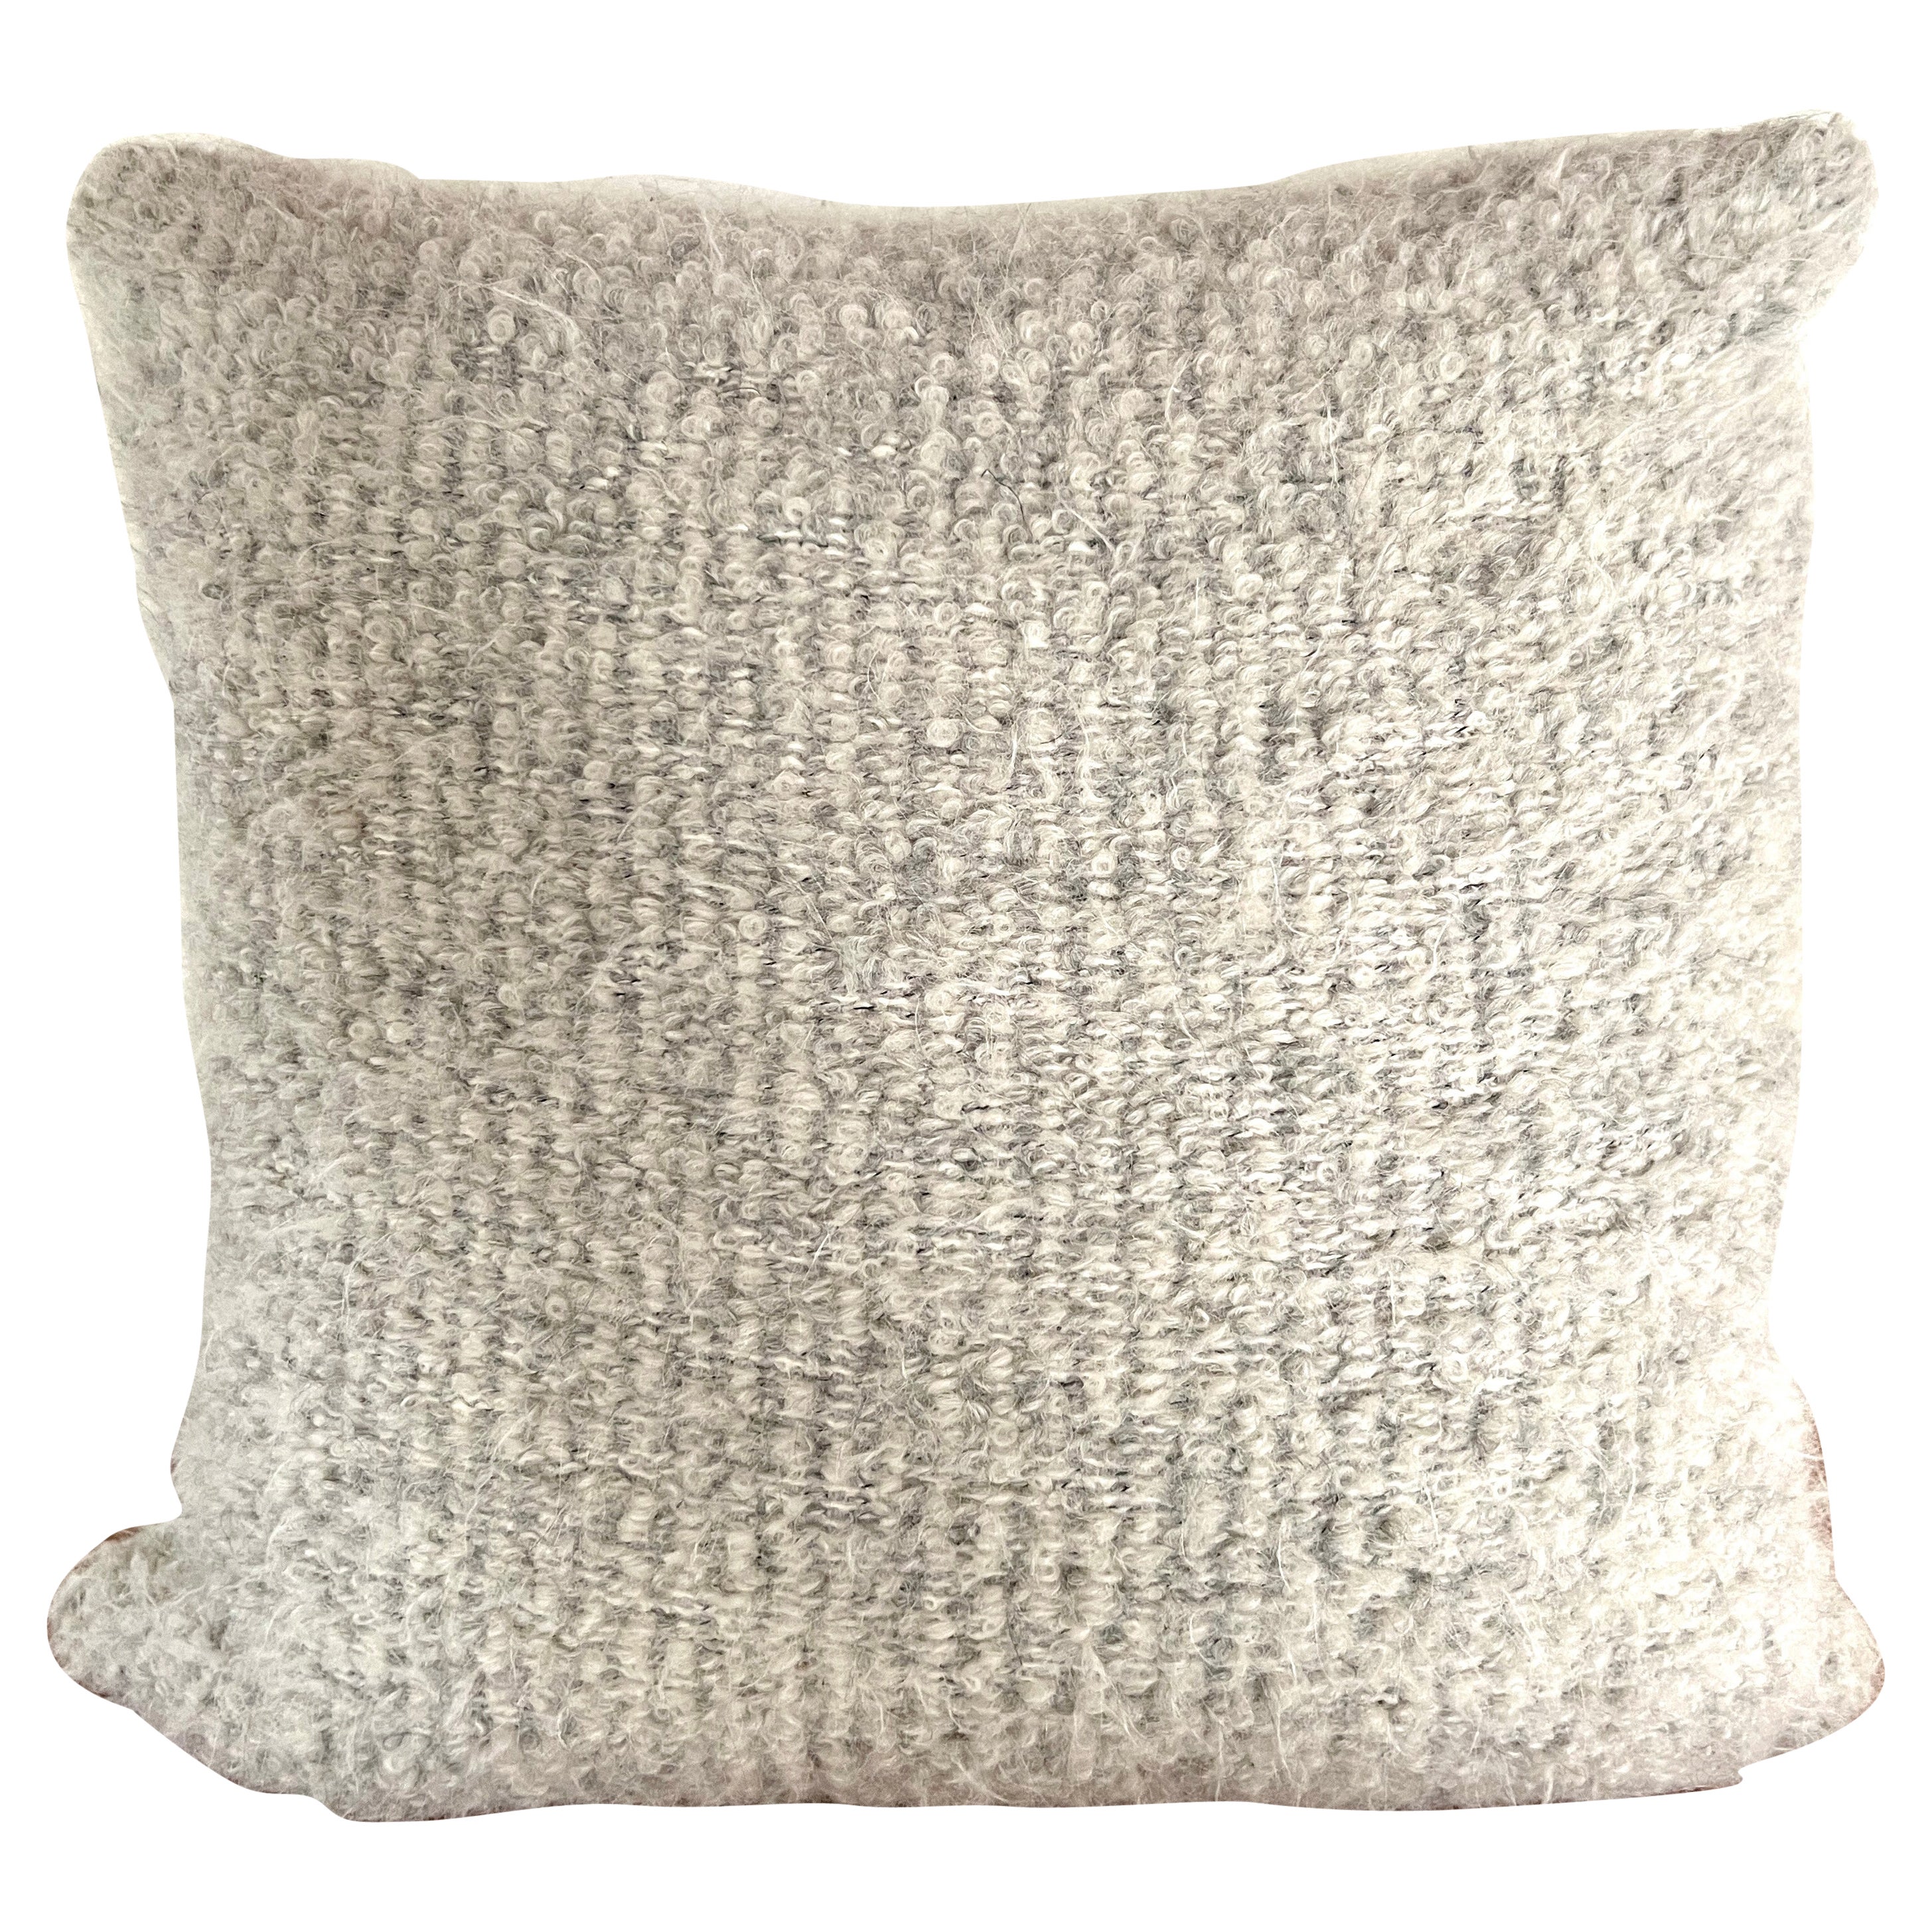 Boucle Mohair and Leather Throw Pillow in Grey - Taupe by Pierre Frey, 18" x 18"